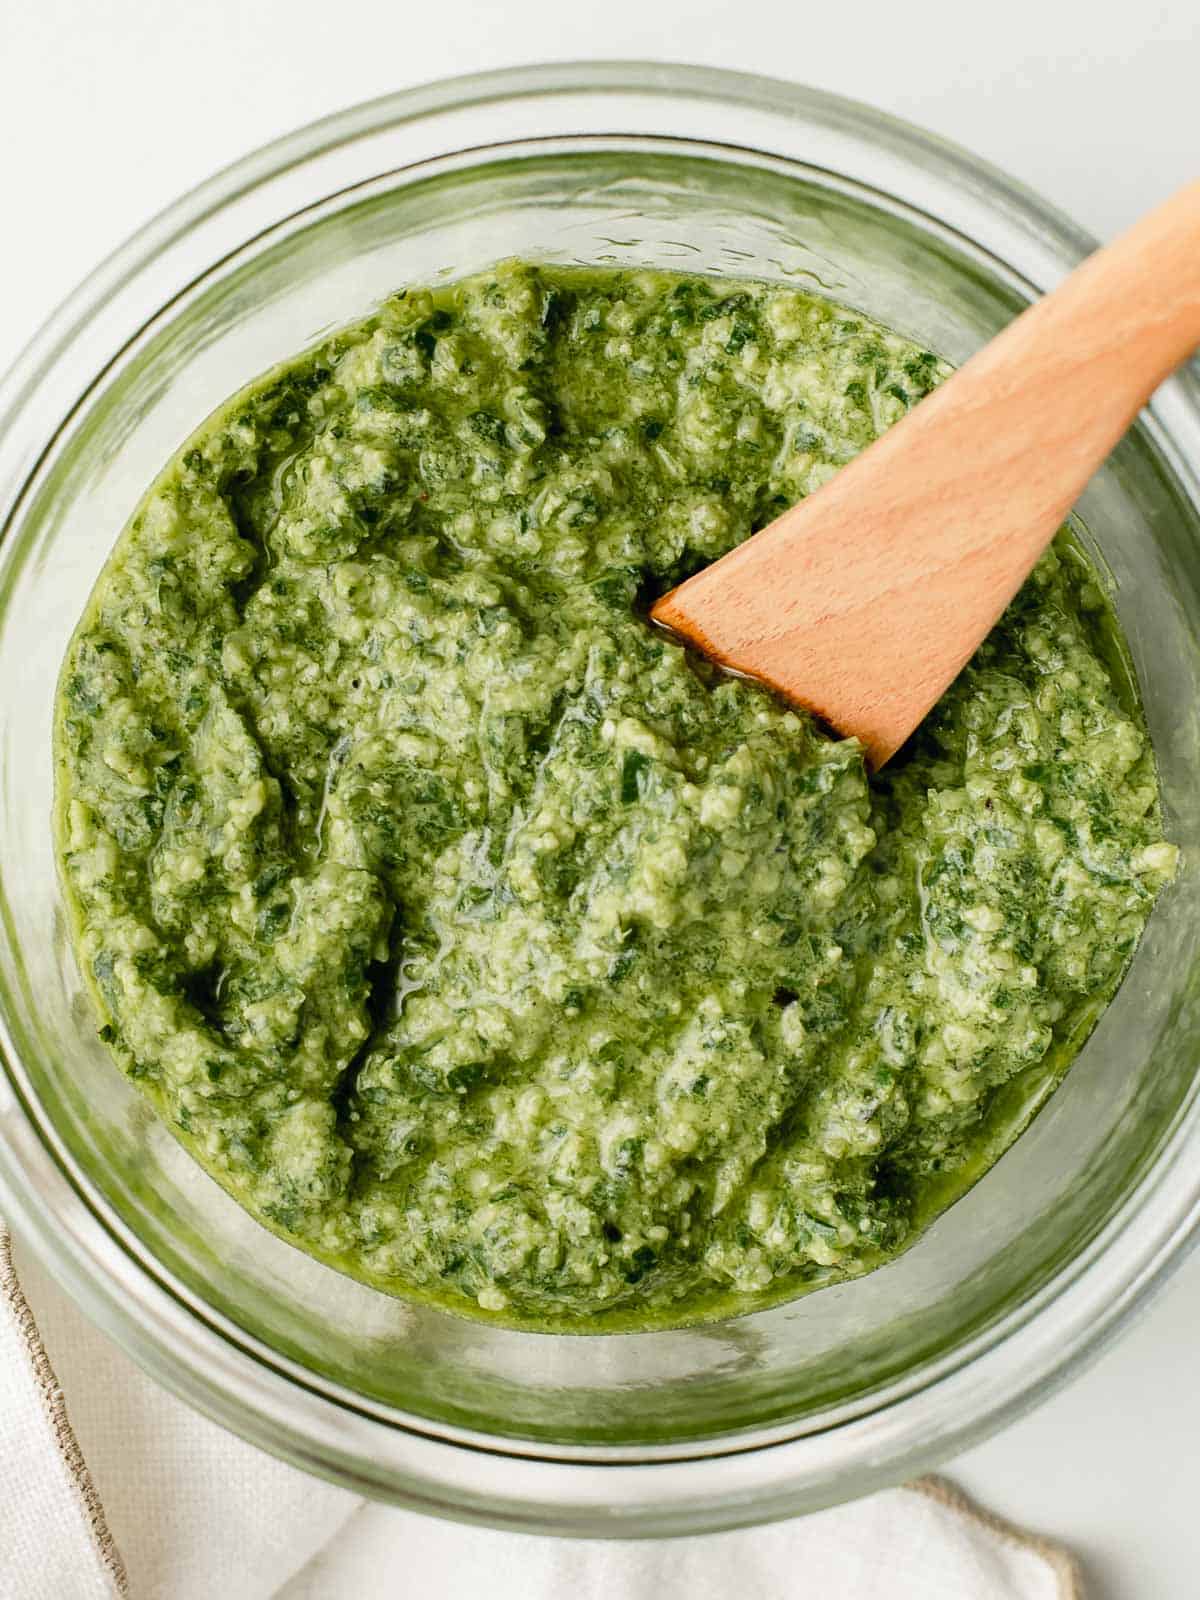 Top view of basil pesto in a glass jar.